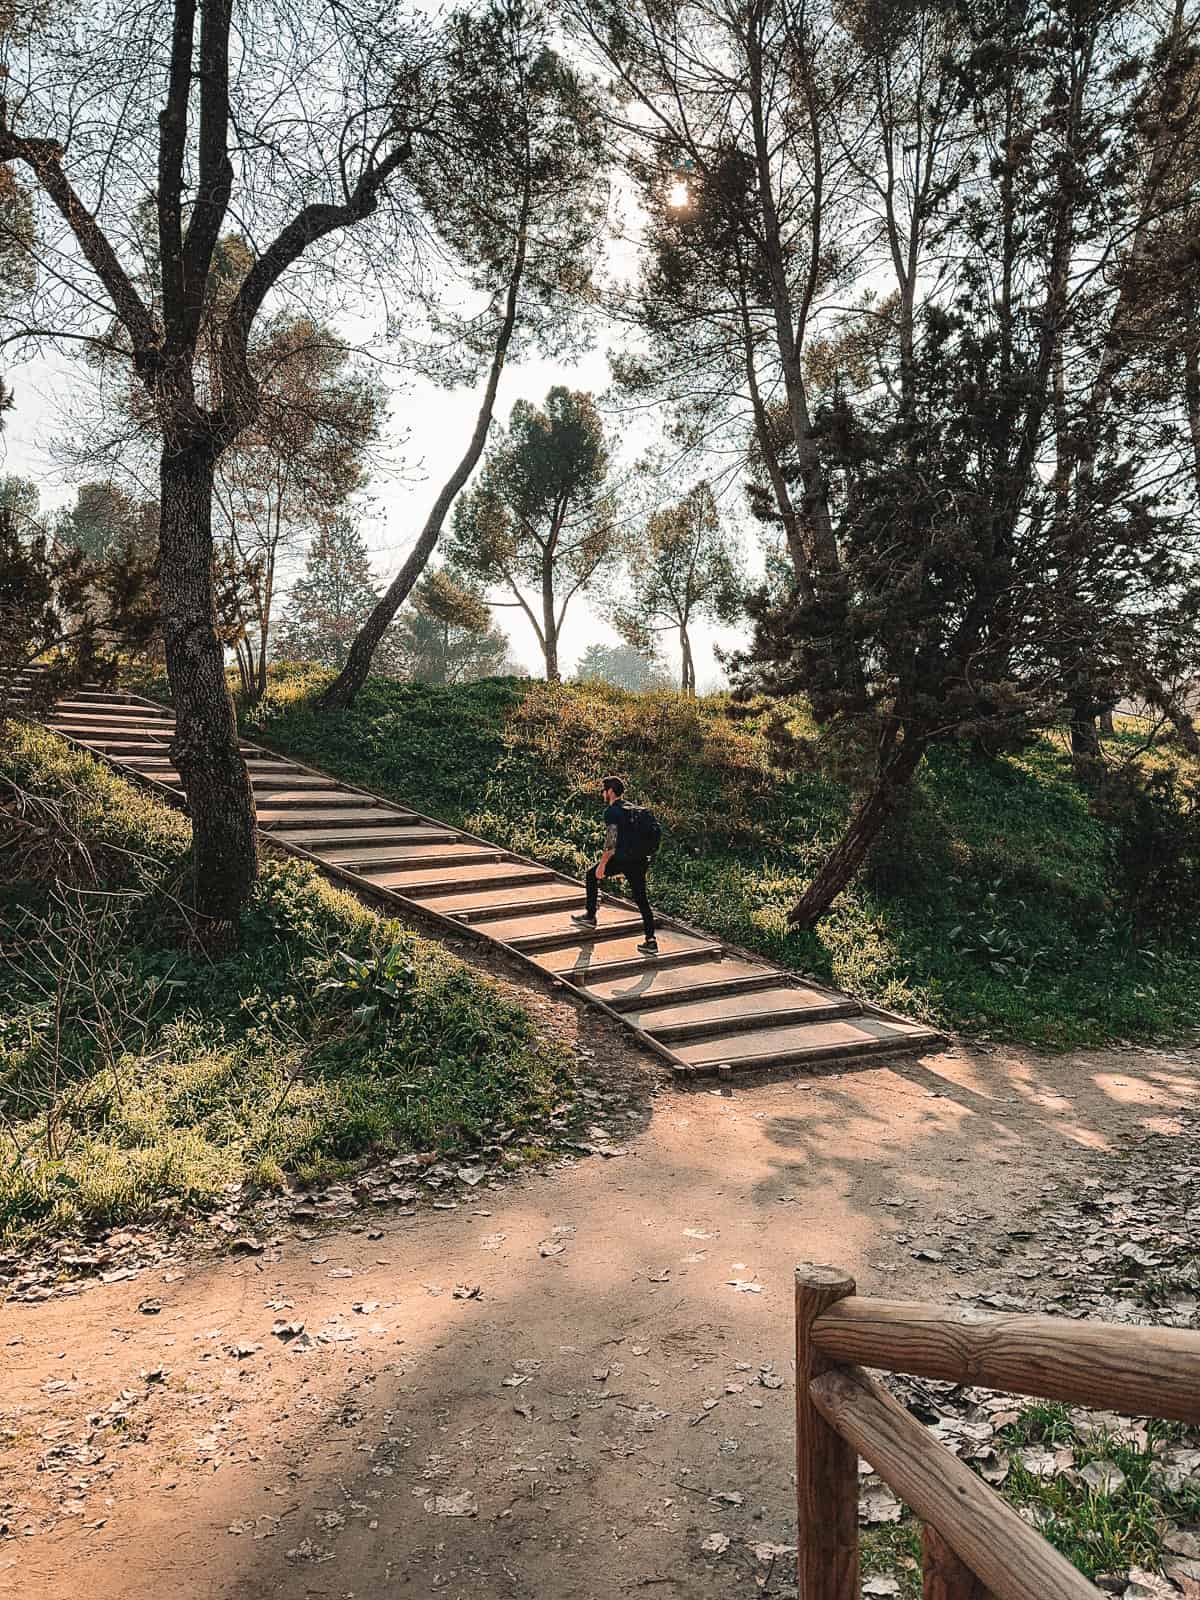 A solitary figure ascends a flight of wooden steps on a rustic trail, flanked by trees and dappled sunlight, evoking a sense of peace and solitude amidst nature.